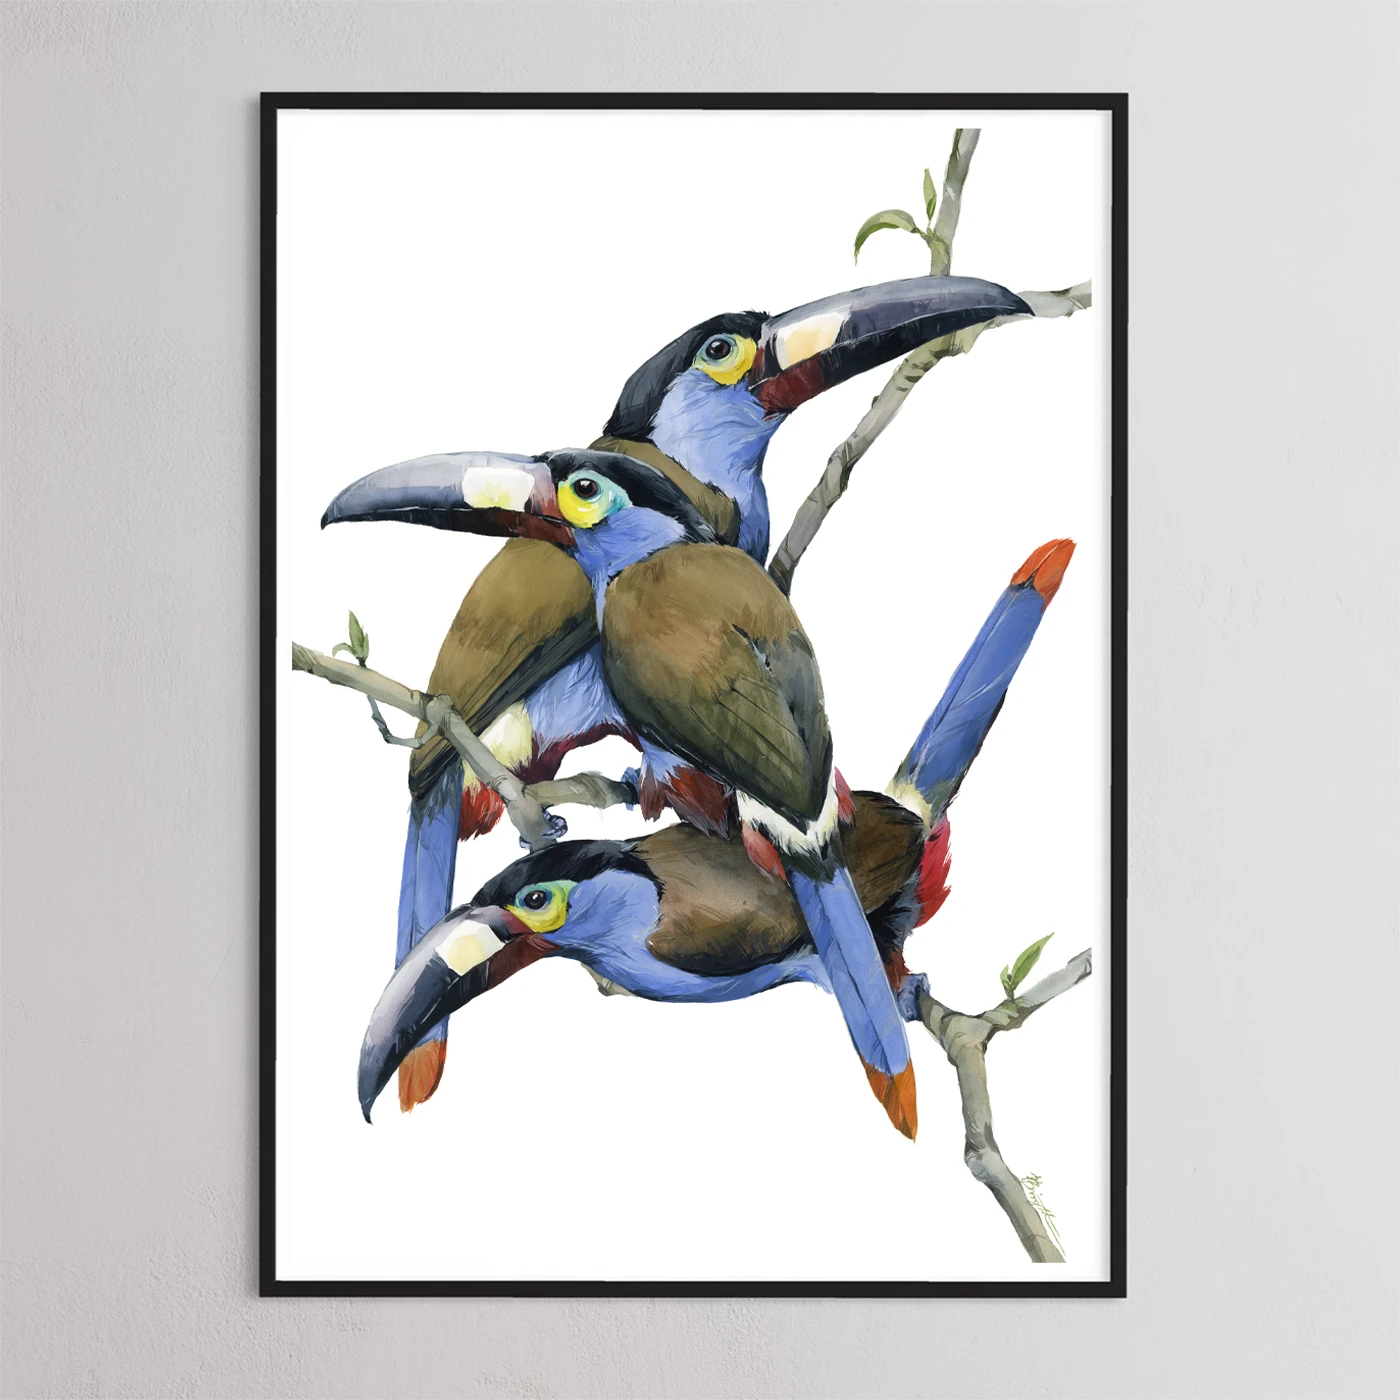 Plate-billed Mountain Toucans by Polina Bright